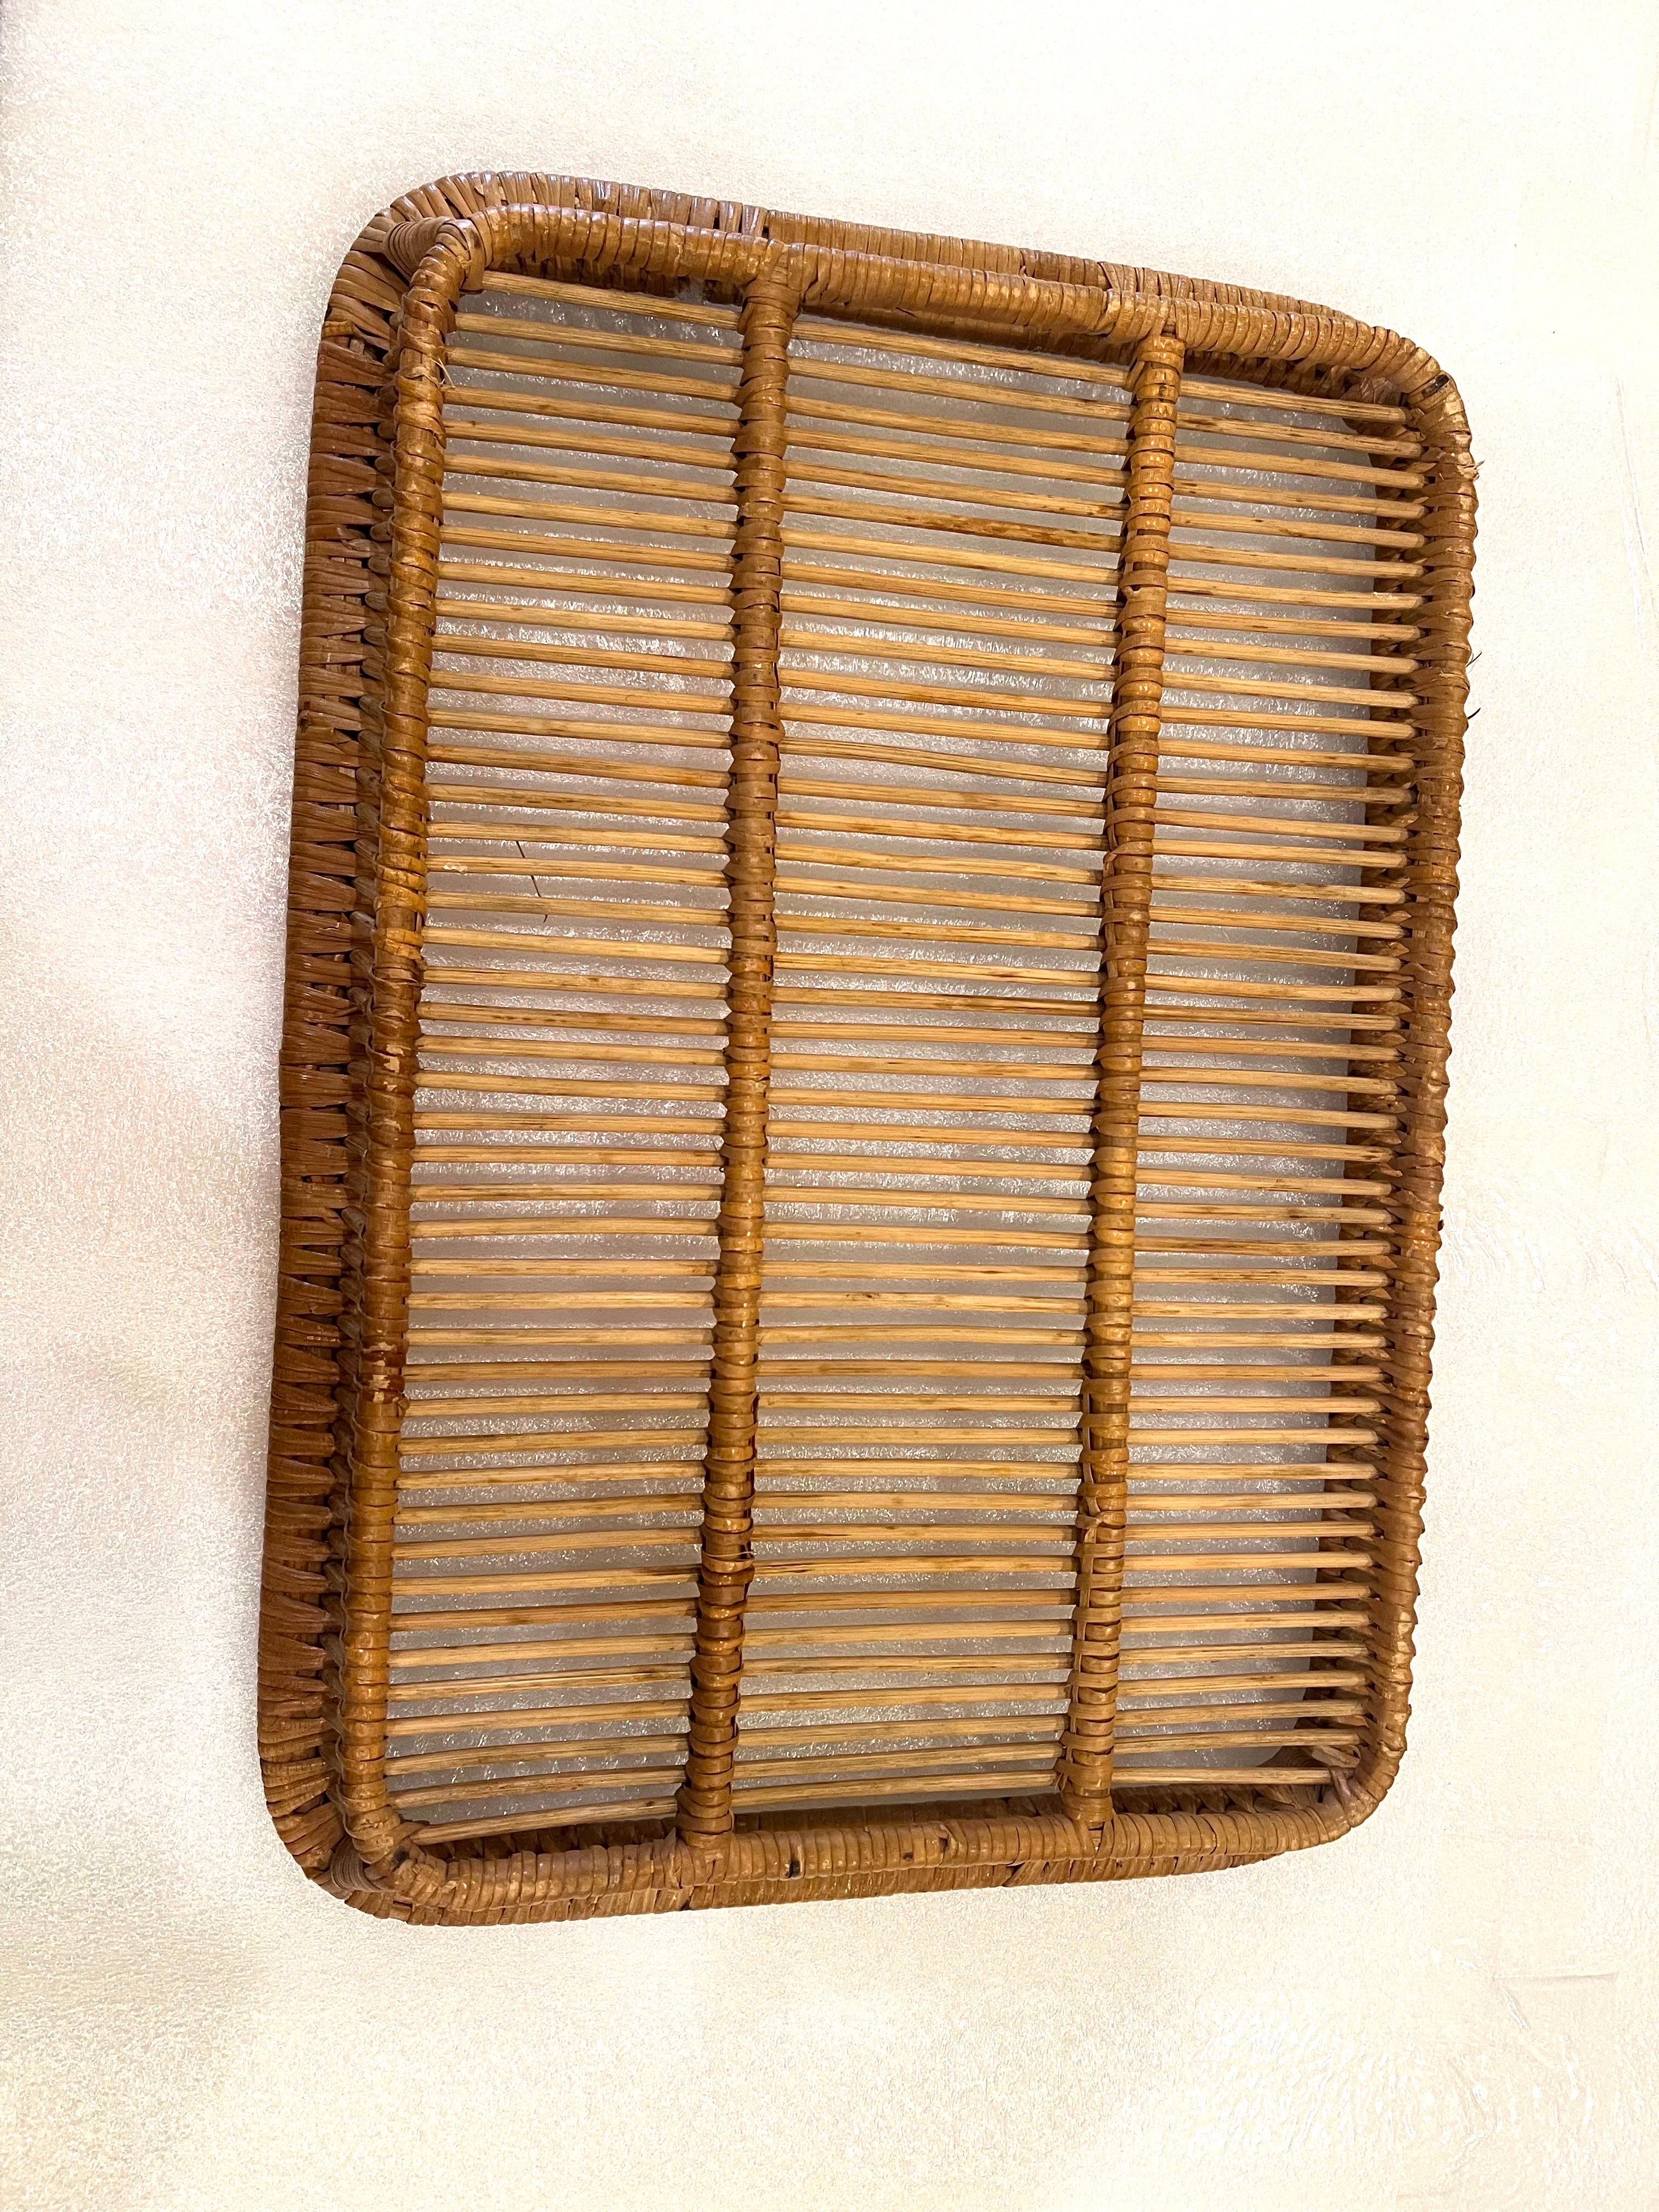 Danish Modern Rattan Tray Made by Artek Finland In Good Condition For Sale In San Diego, CA